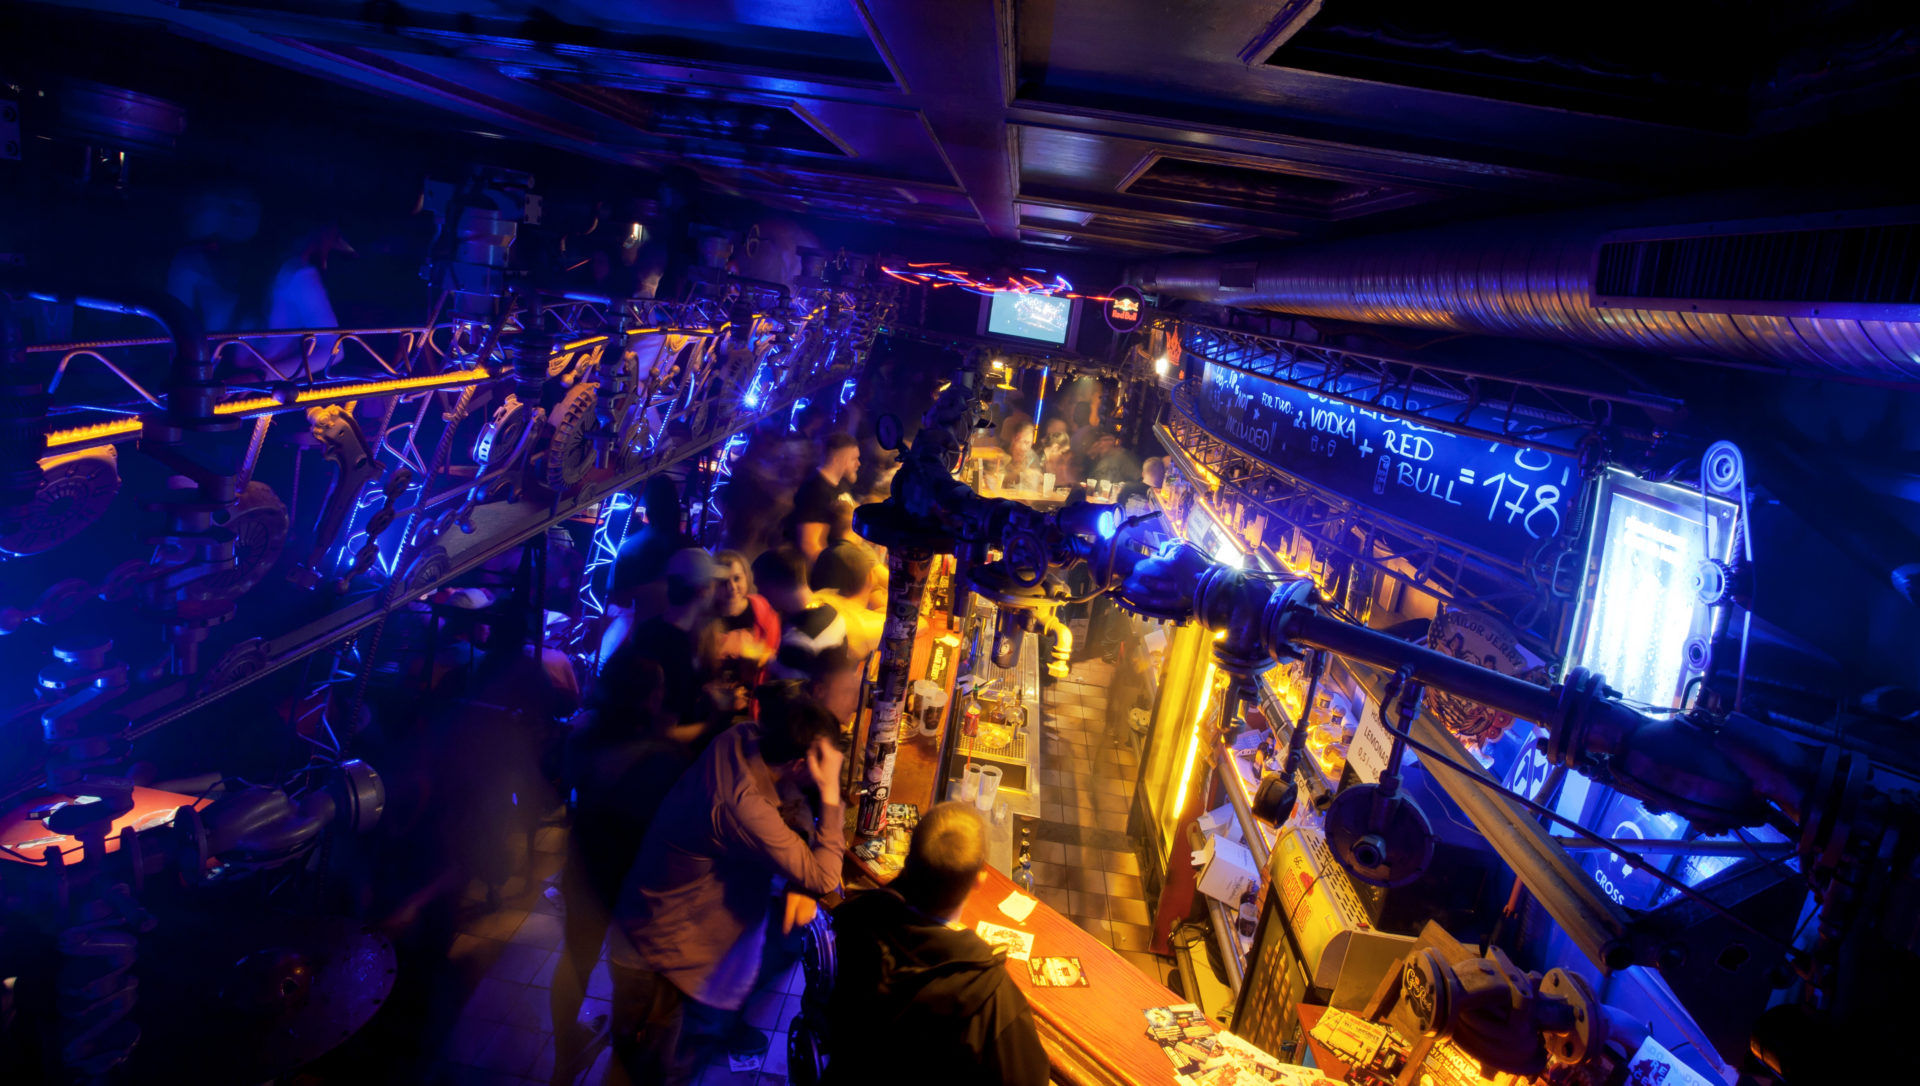 Nightlife and Clubbing in Prague - Dance/Music Clubs, Cocktail bars